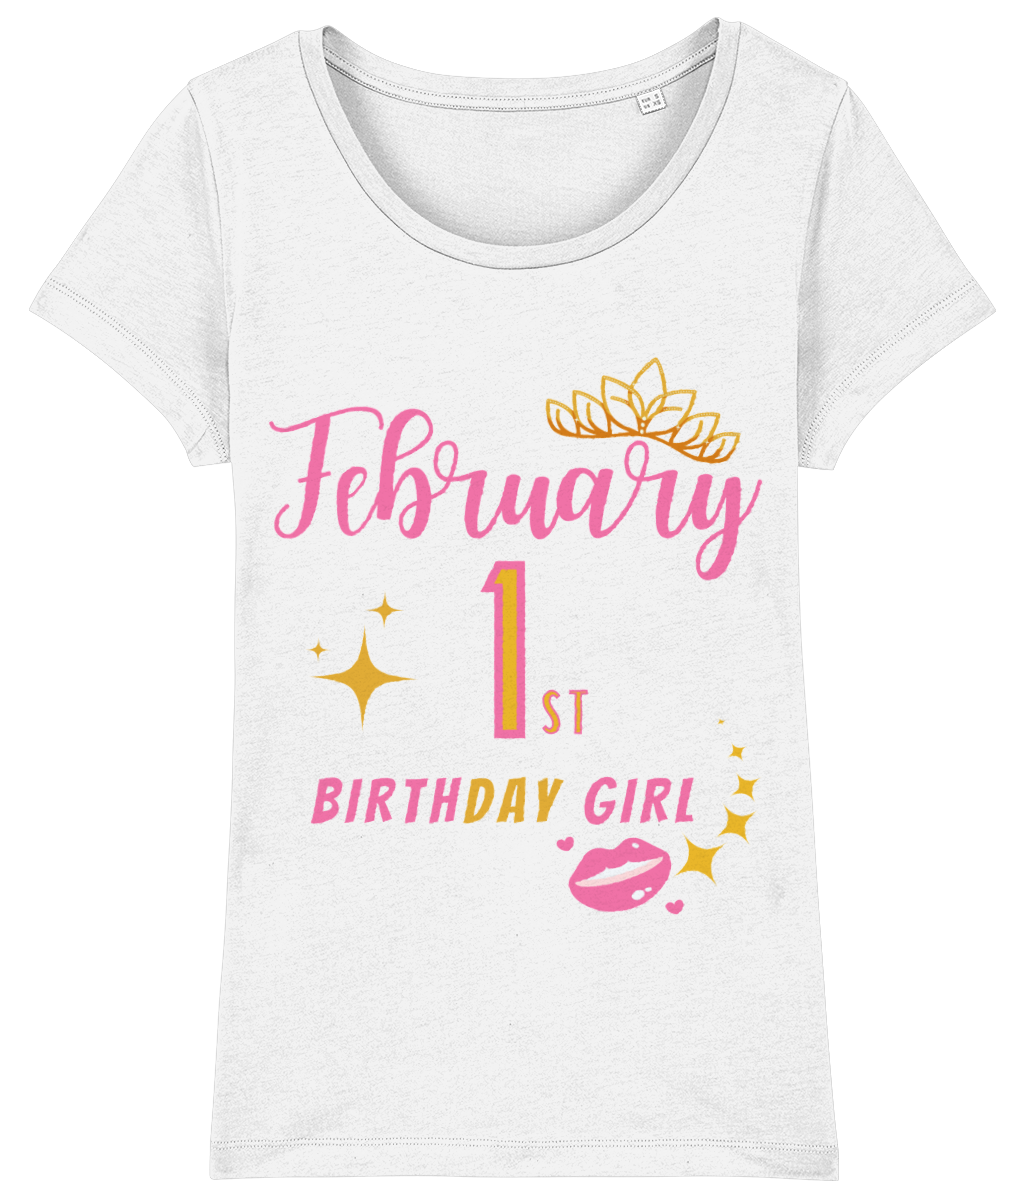 Personalised Date Birthday Girl T Shirt - Fitted Ladies